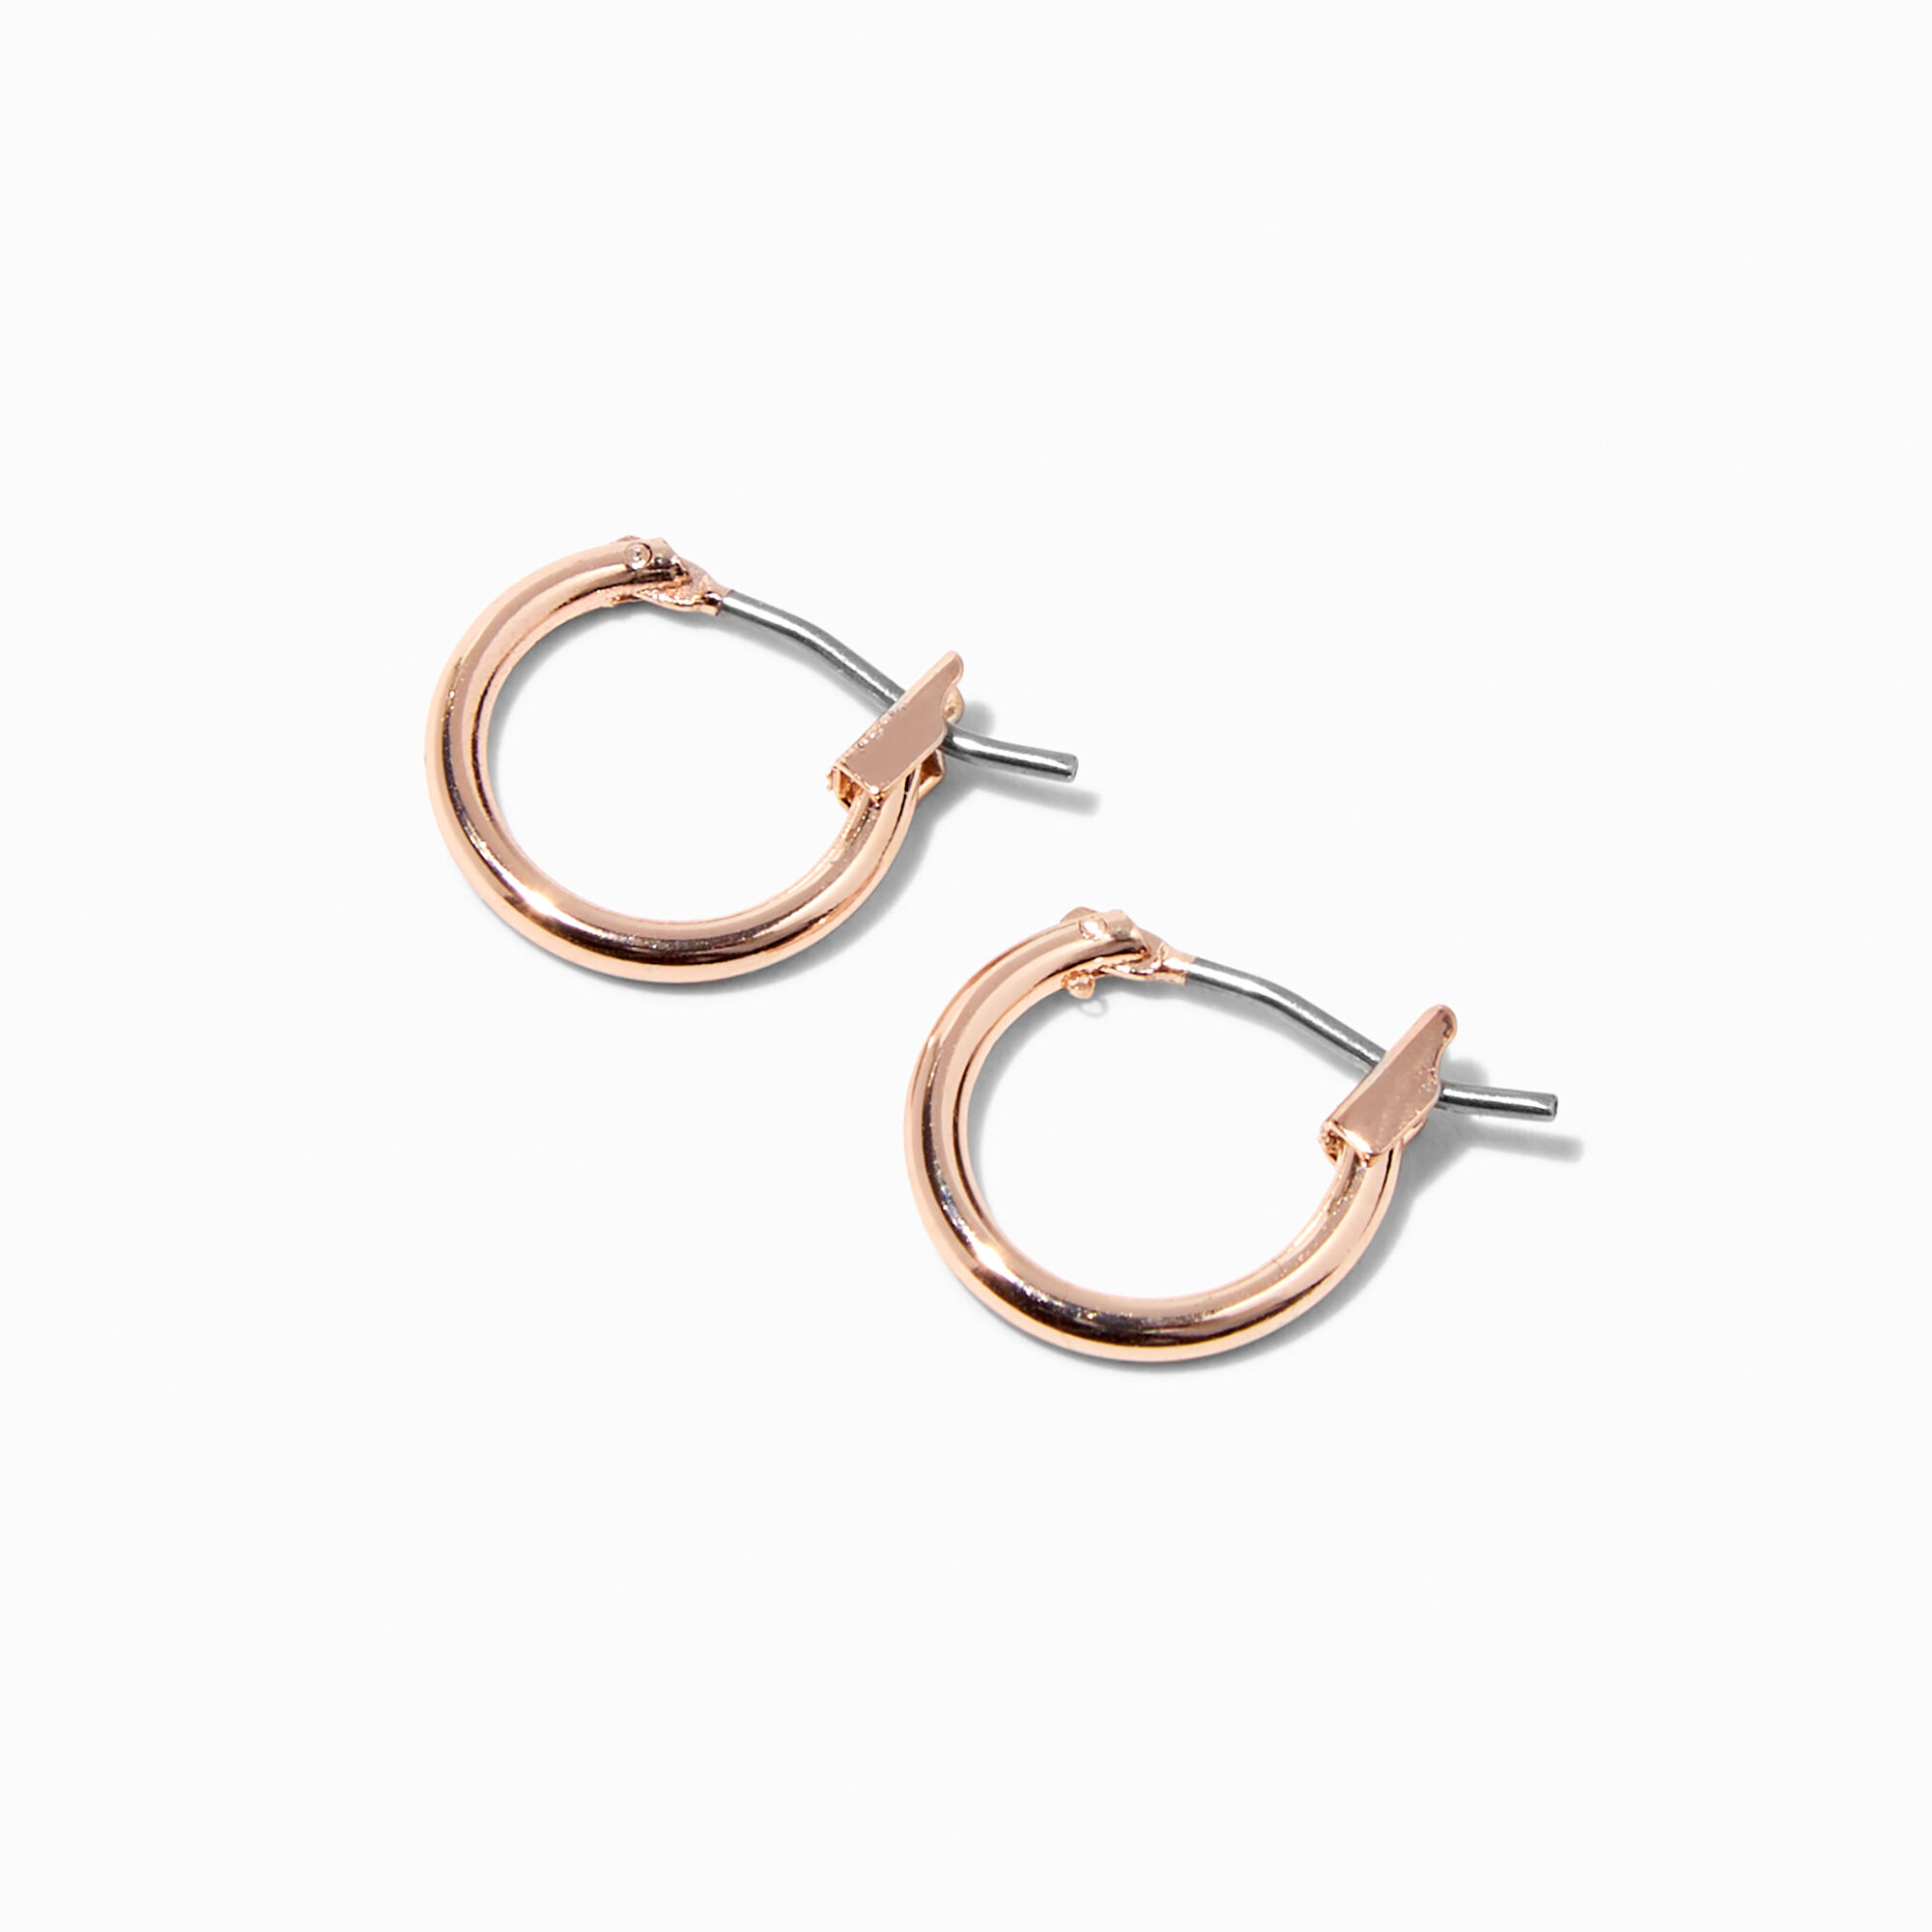 View Claires Tone 10MM Hoop Earrings Rose Gold information